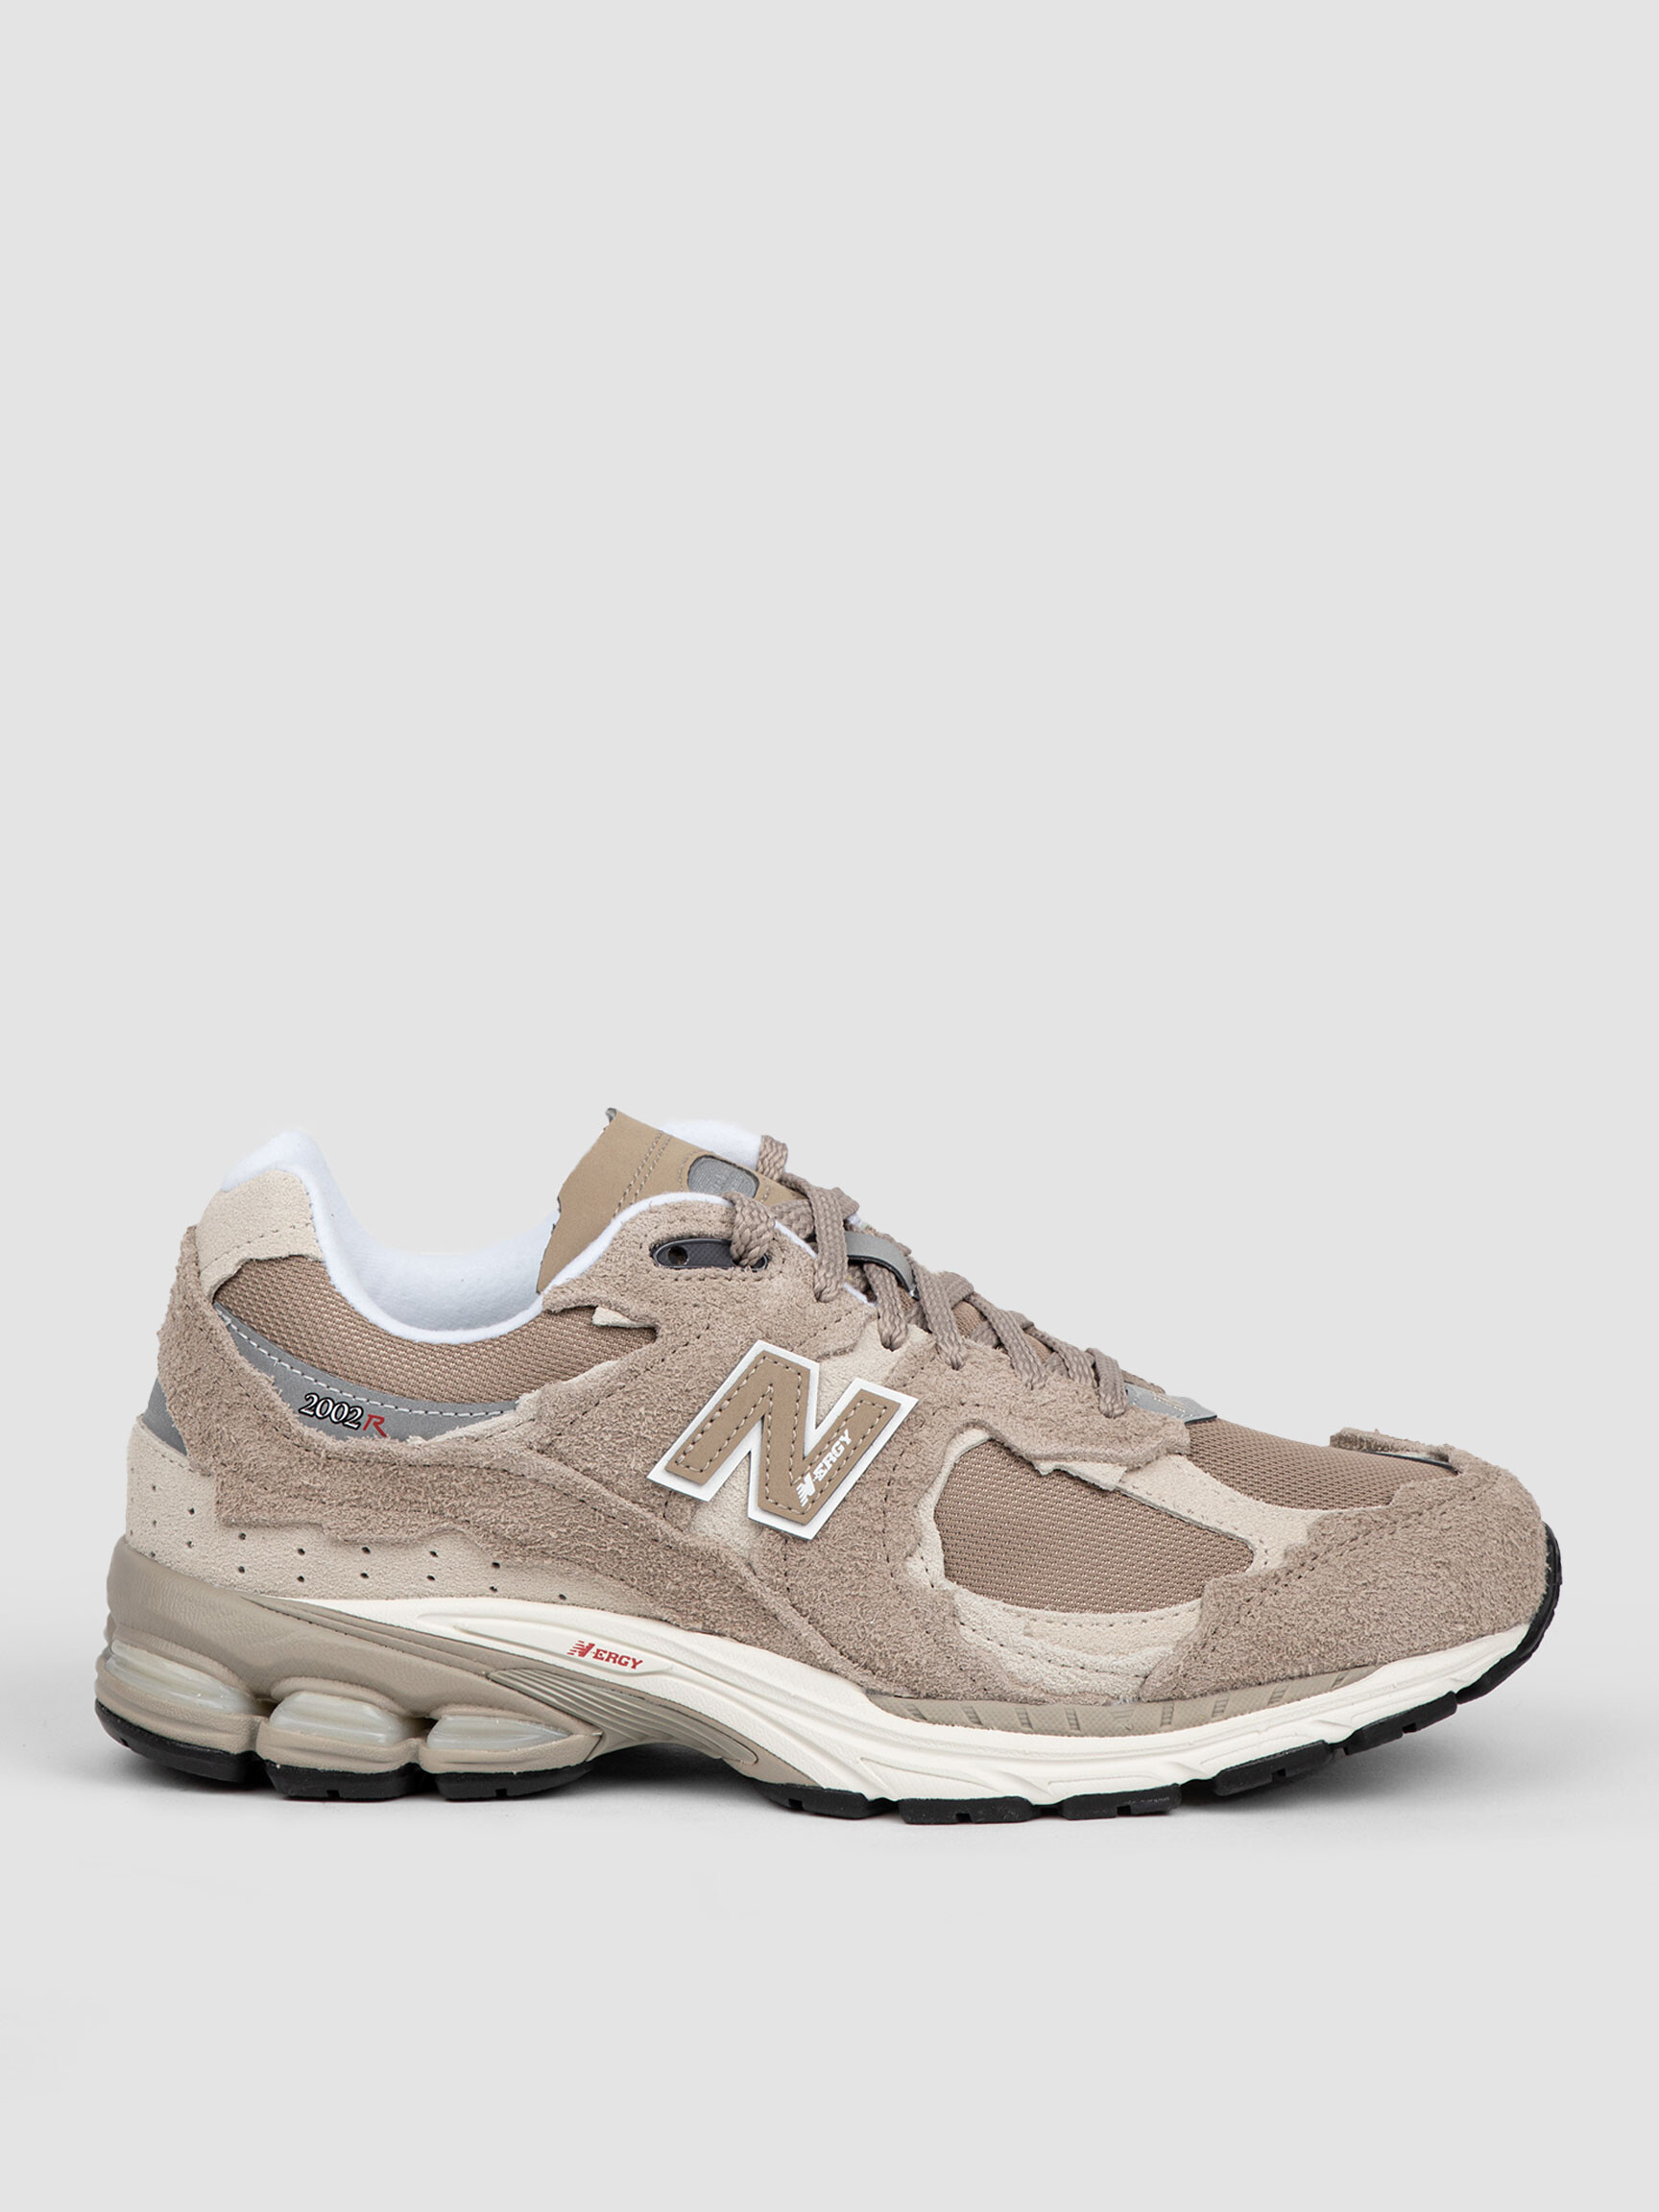 Pale Pink Womens 515 Sneaker | New Balance | Rack Room Shoes